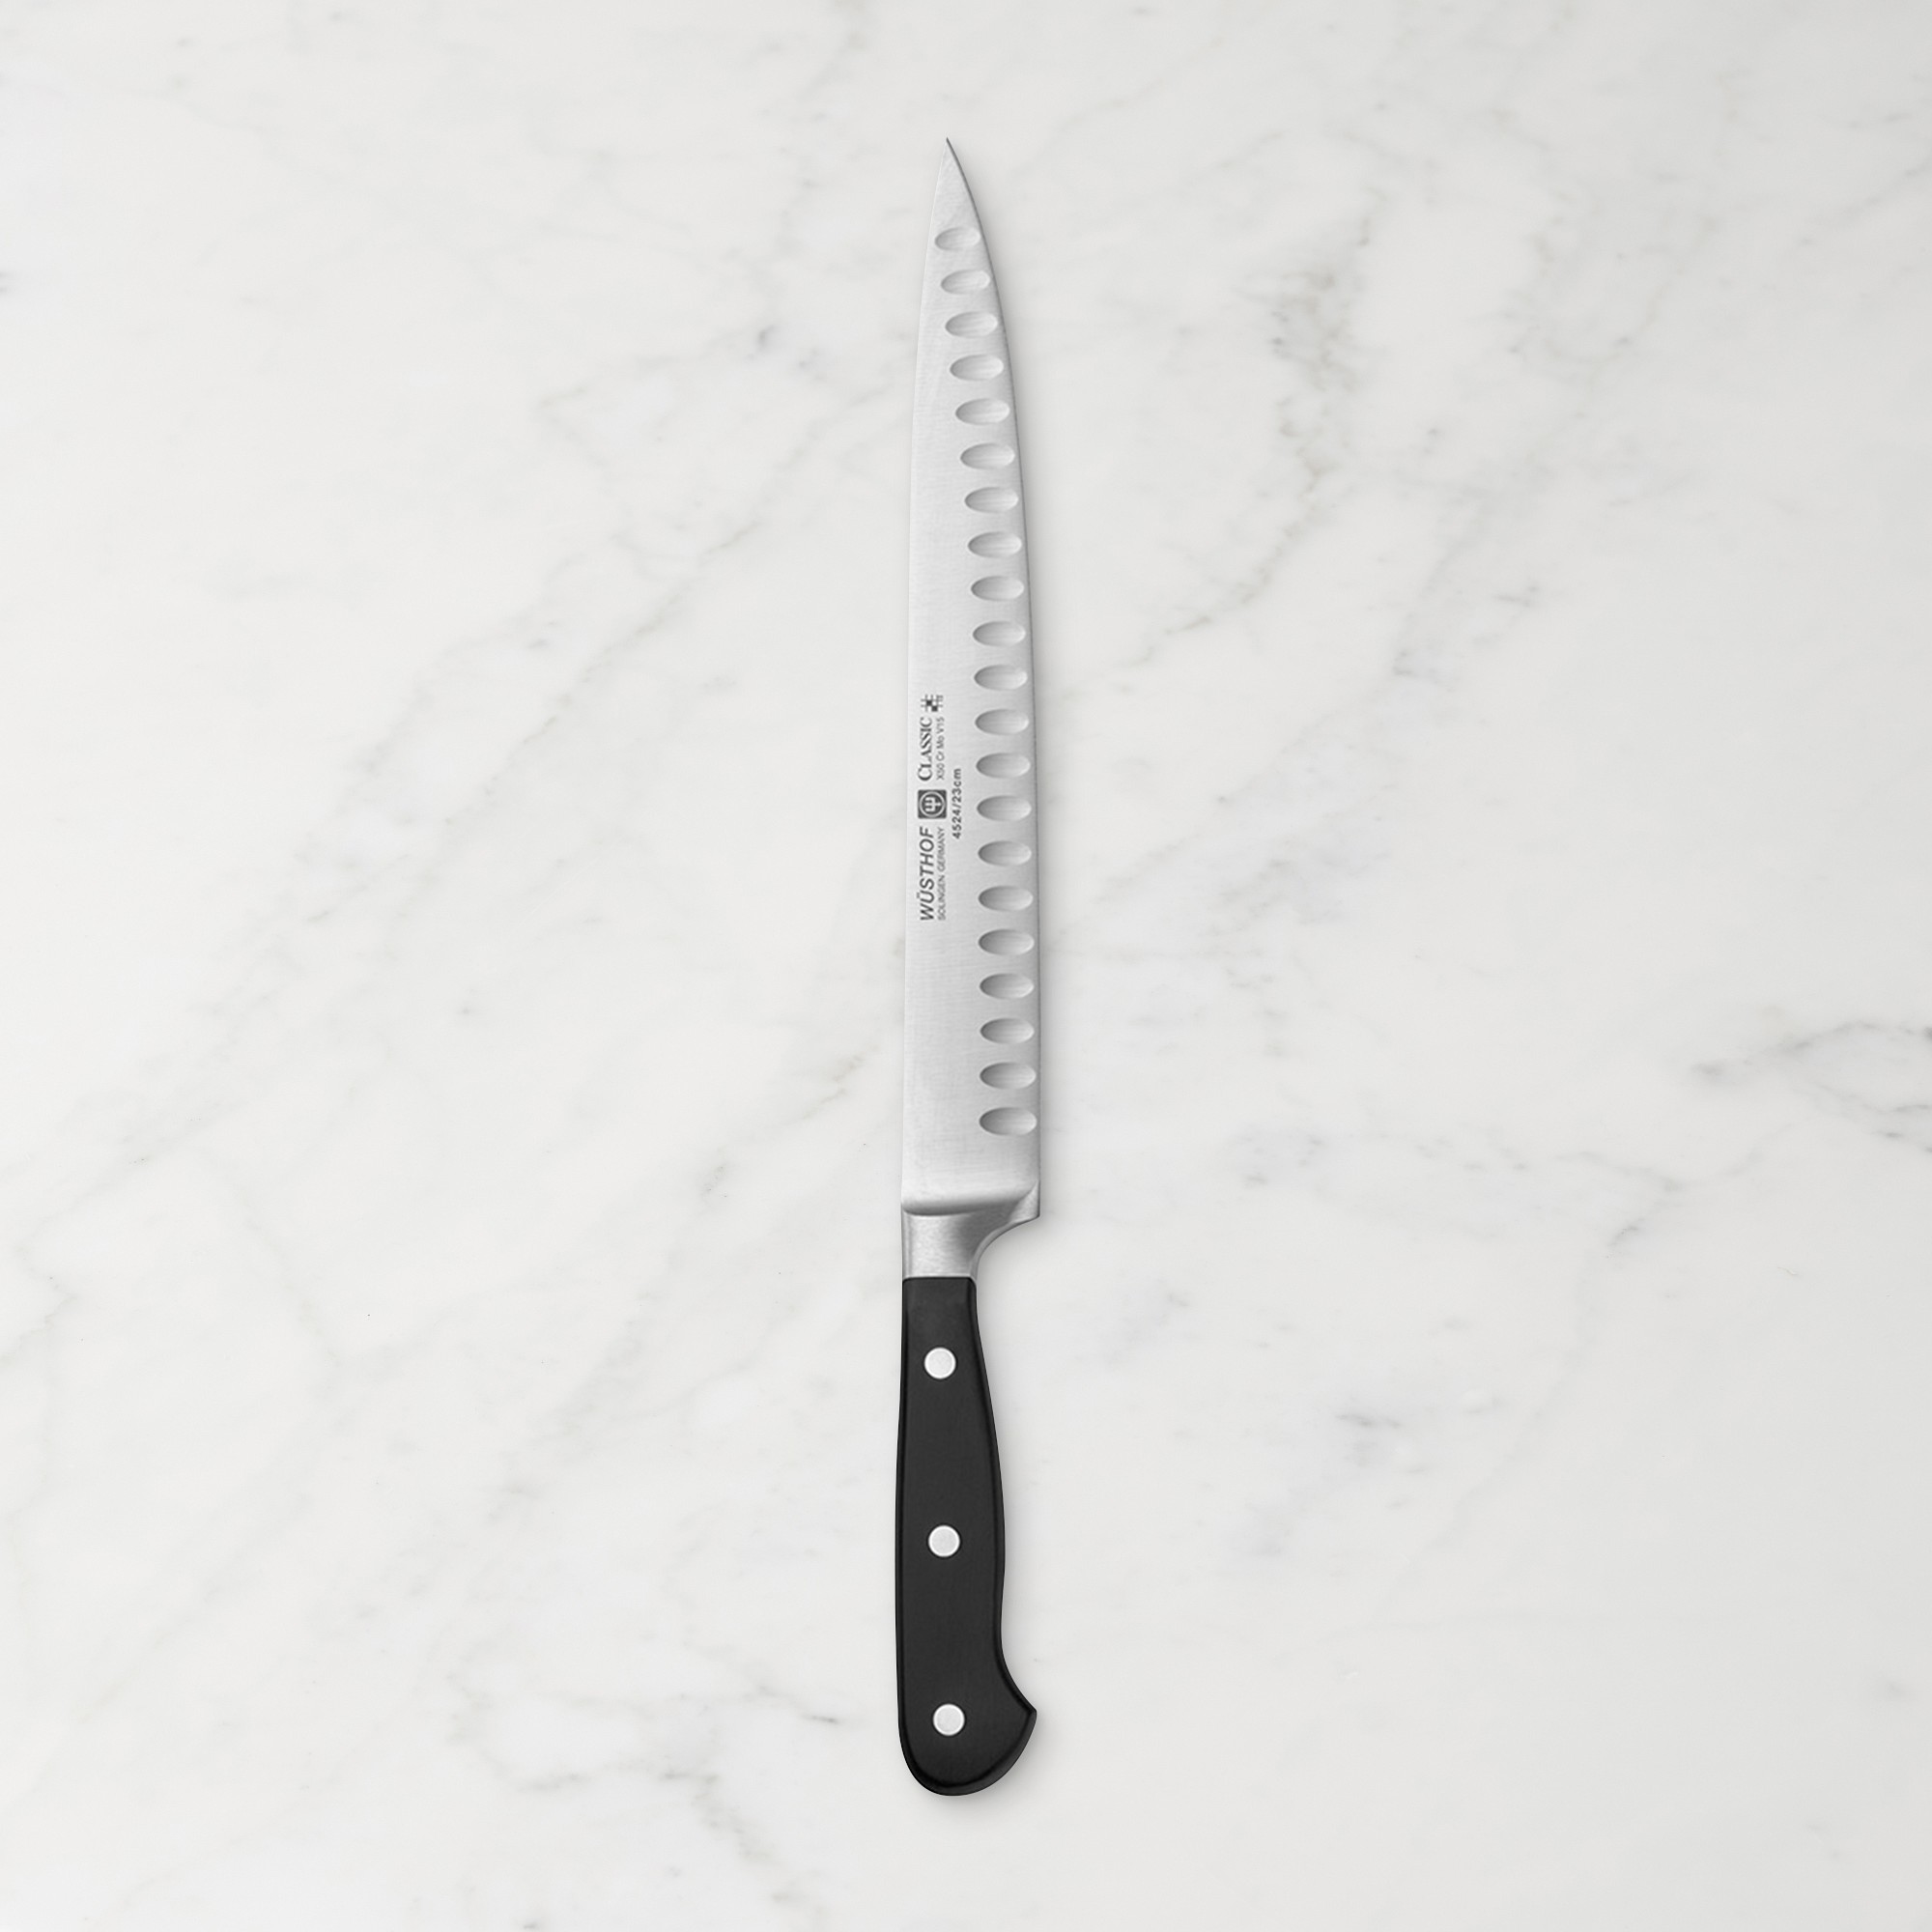 Wüsthof Classic Hollow-Edge Carving Knife, 9"